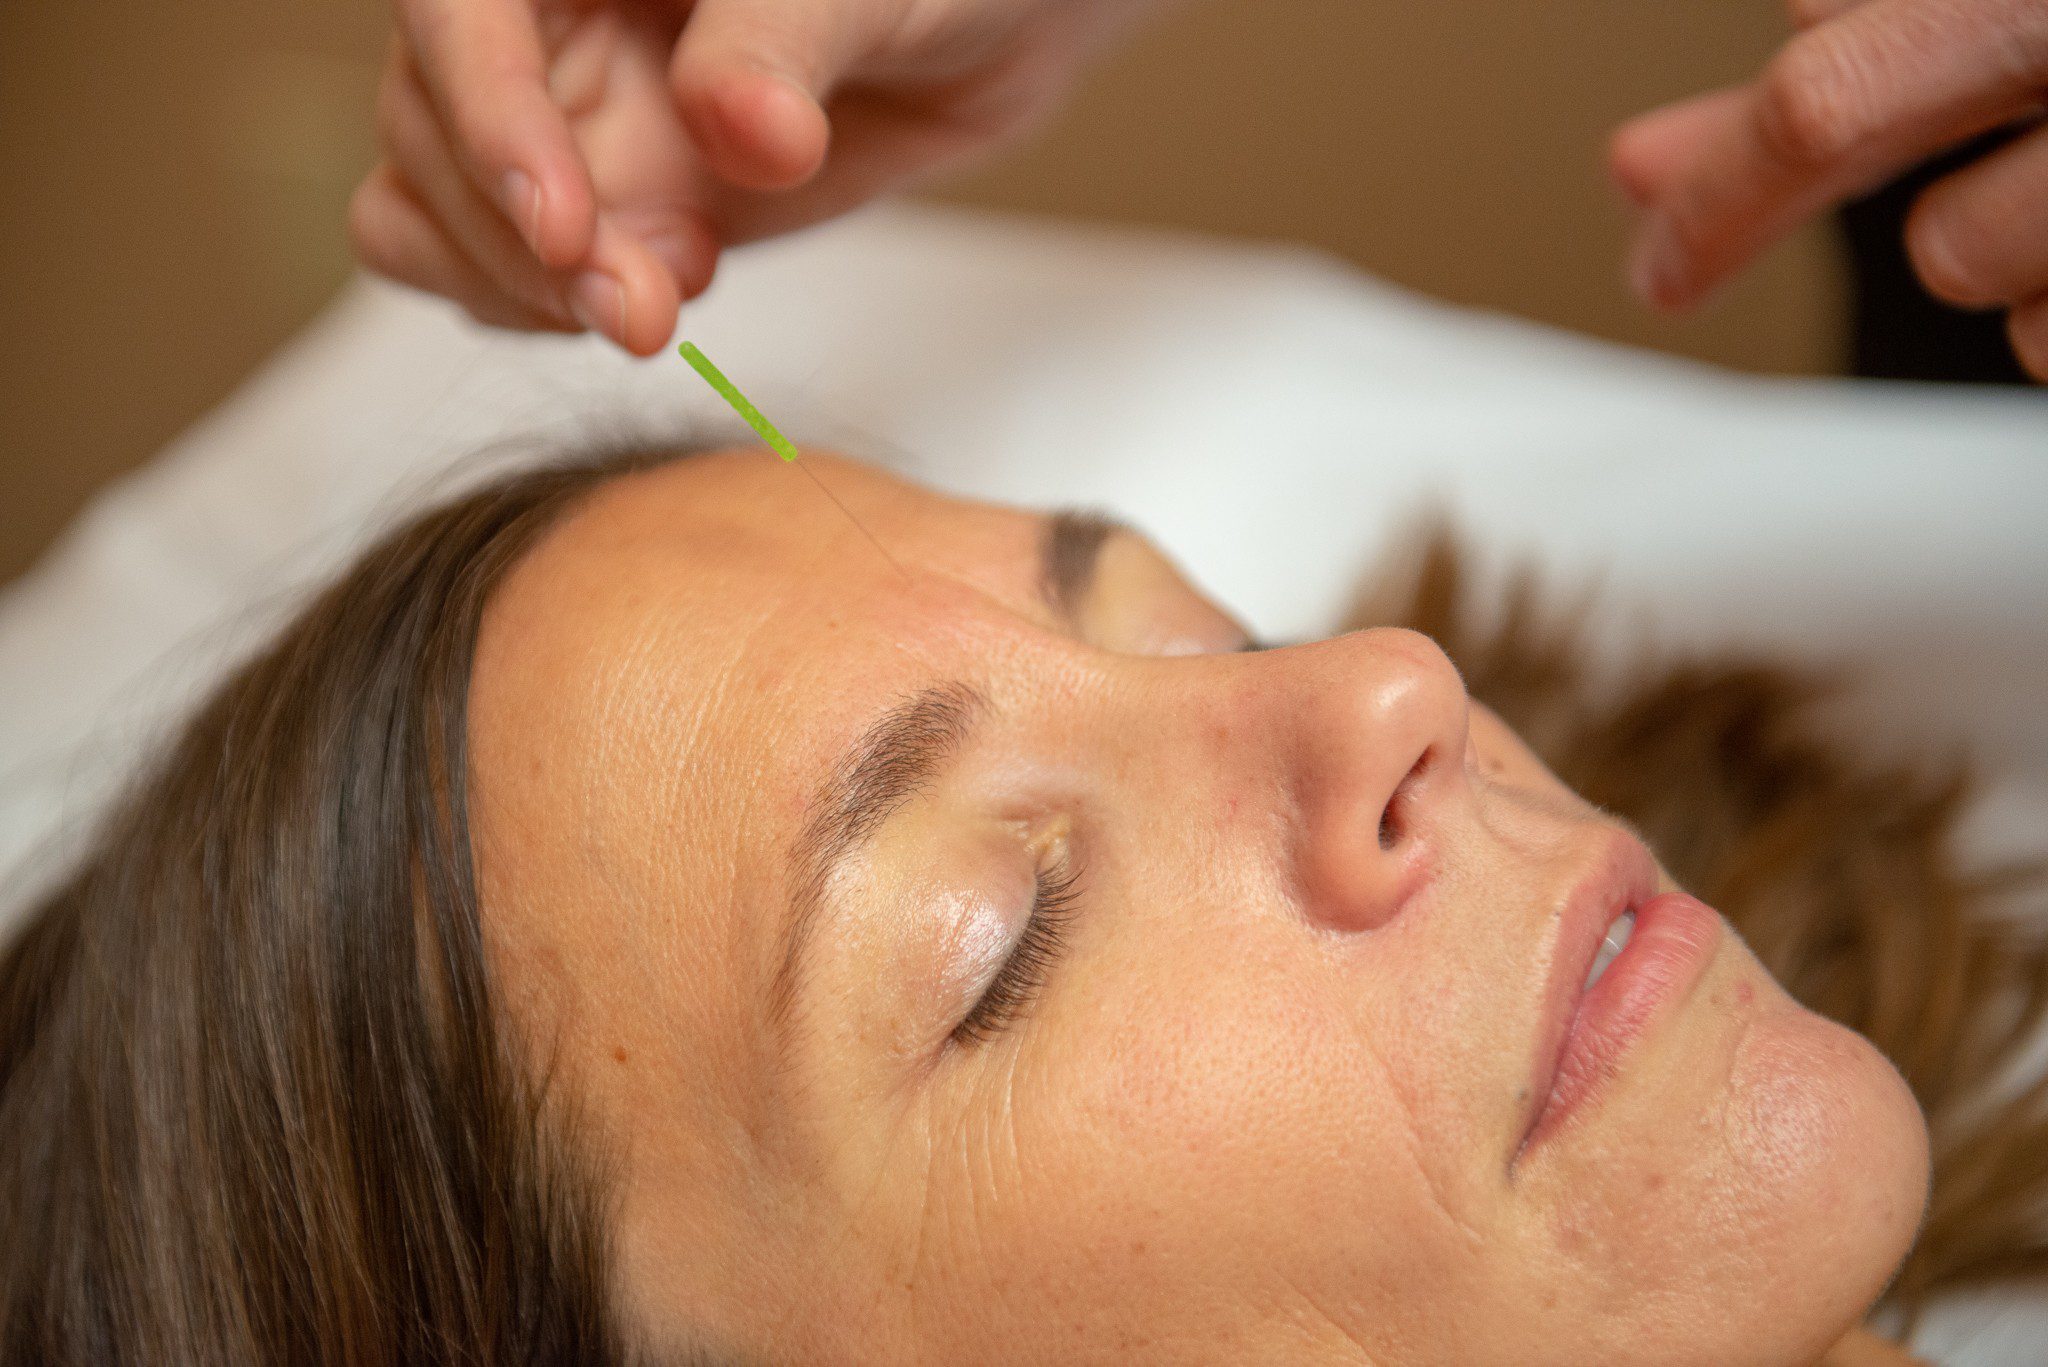 acupuncture needle place in between patient's eyebrows.